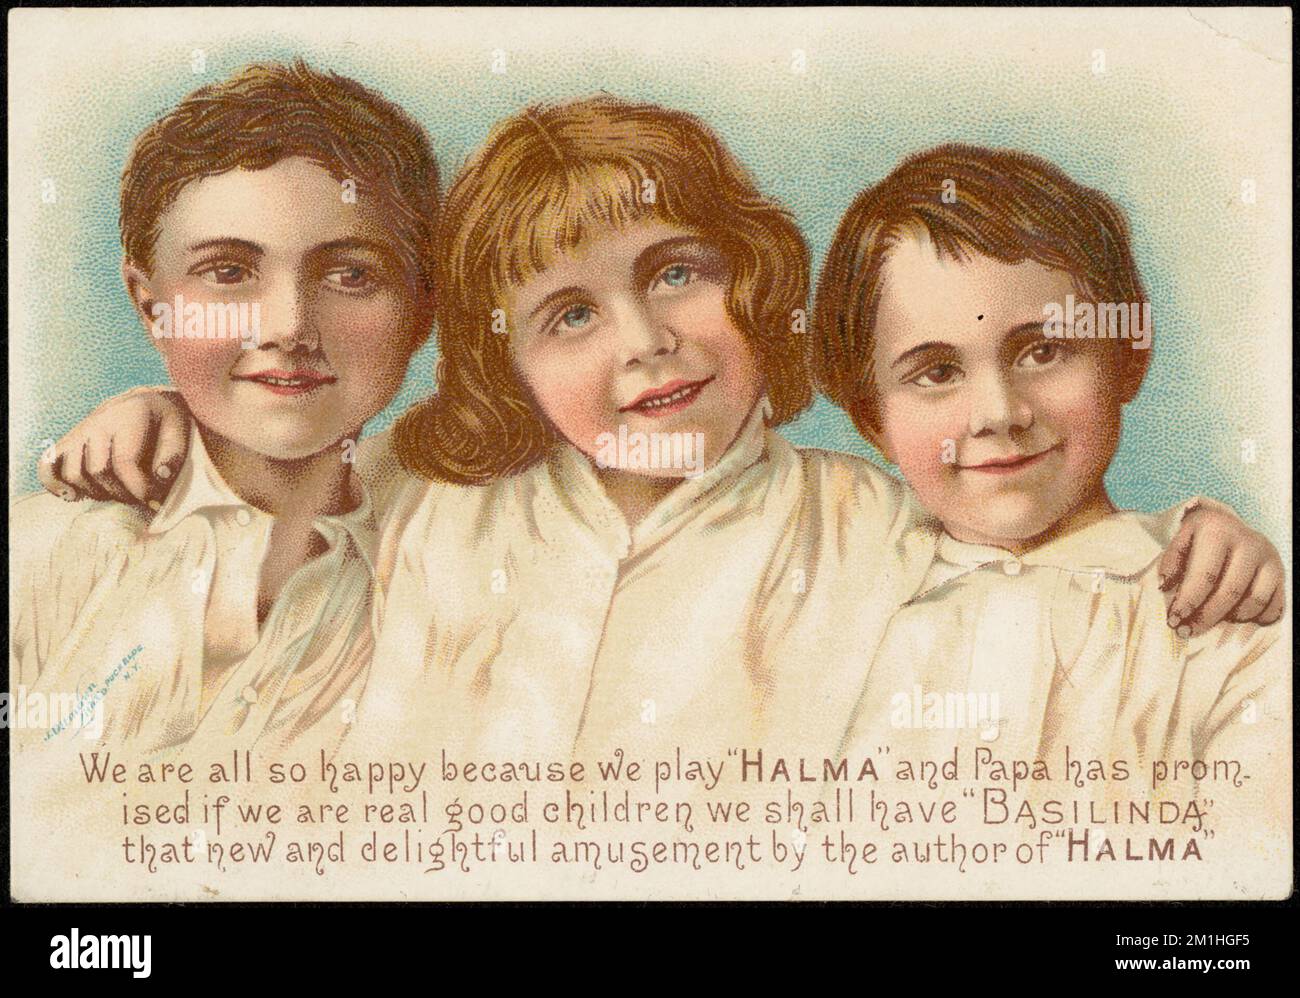 We are all so happy because we play 'Halma' and papa has promised that if we are real good children we shall have 'Basilinda' that new and delightful amusement by the author of 'Halma.' , Children, Board games, 19th Century American Trade Cards Stock Photo